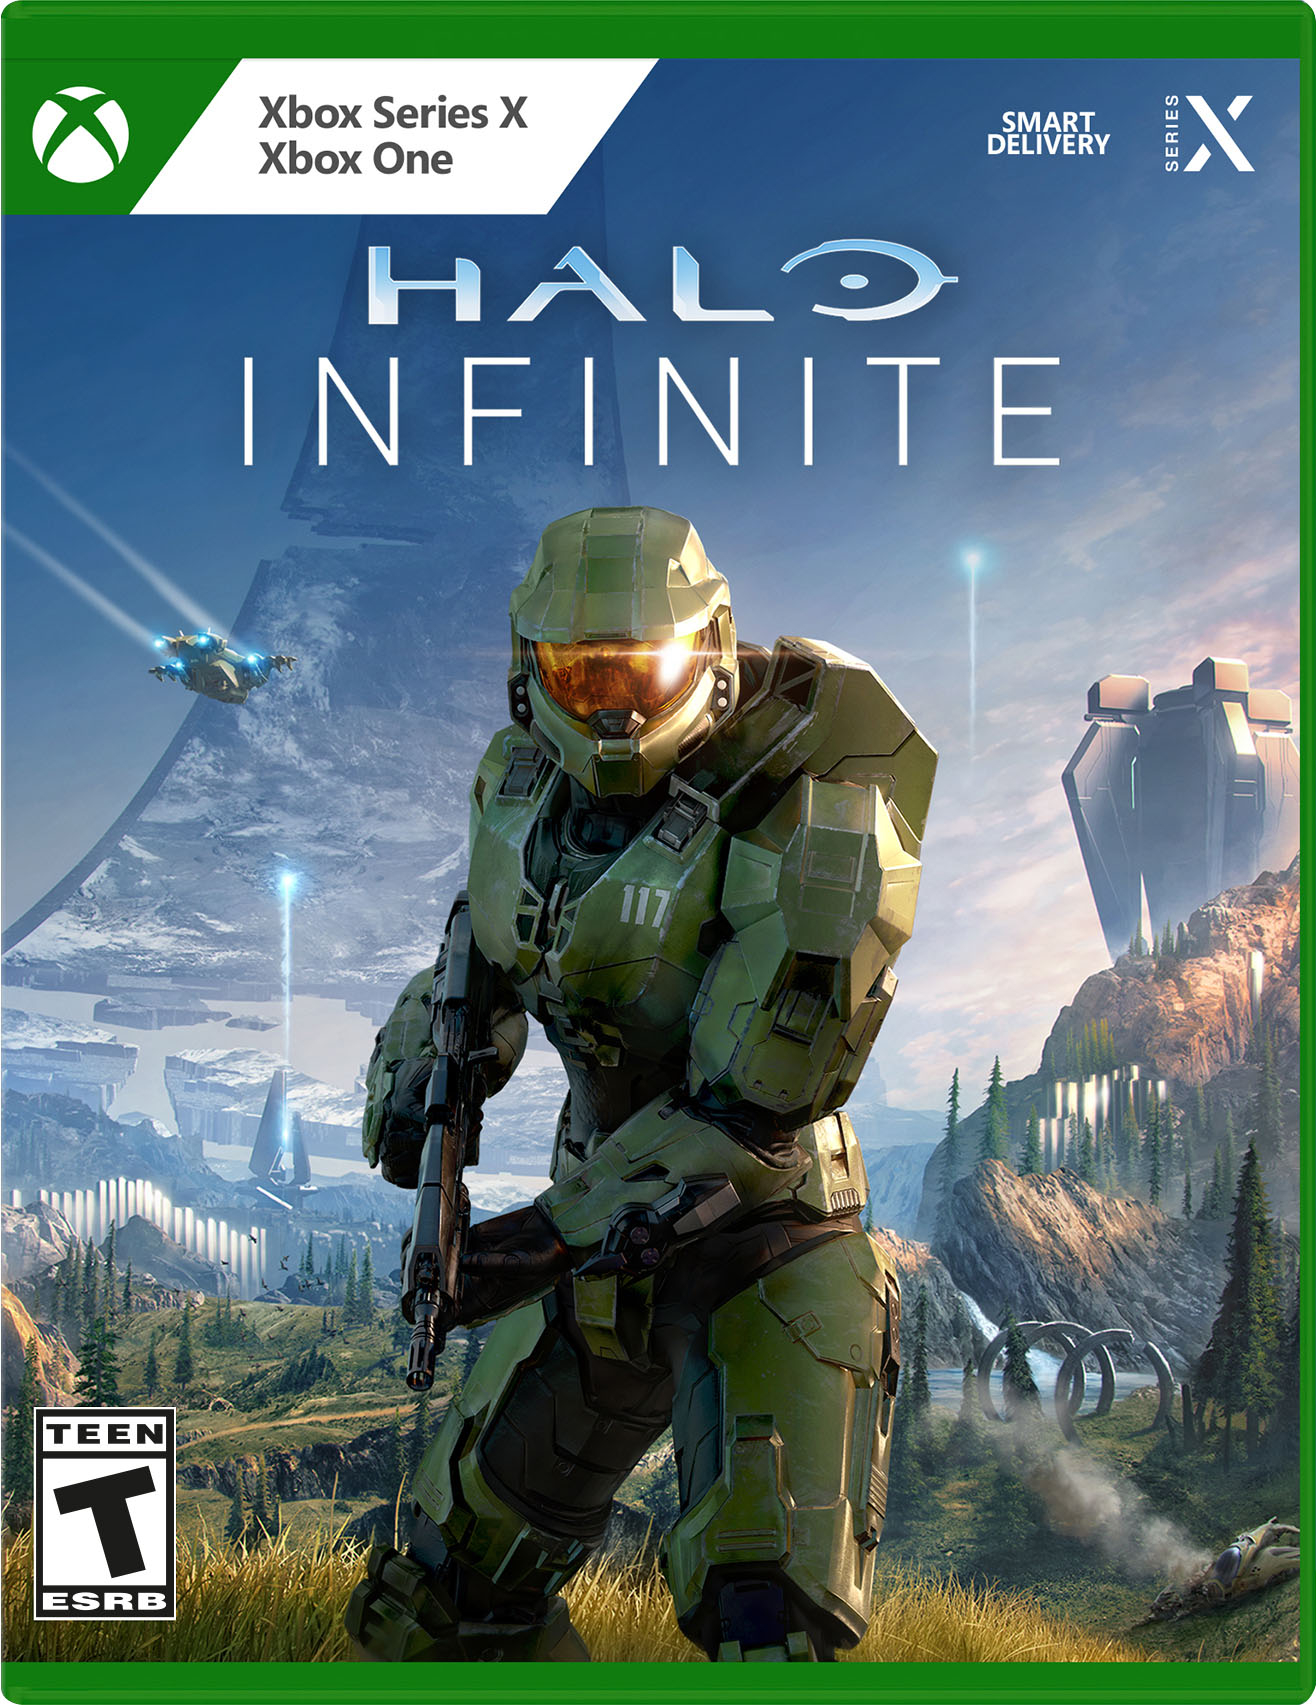 Halo: The Master Chief Collection Master Edition Xbox One, Xbox Series X,  Xbox Series S [Digital] G7Q-00001 - Best Buy